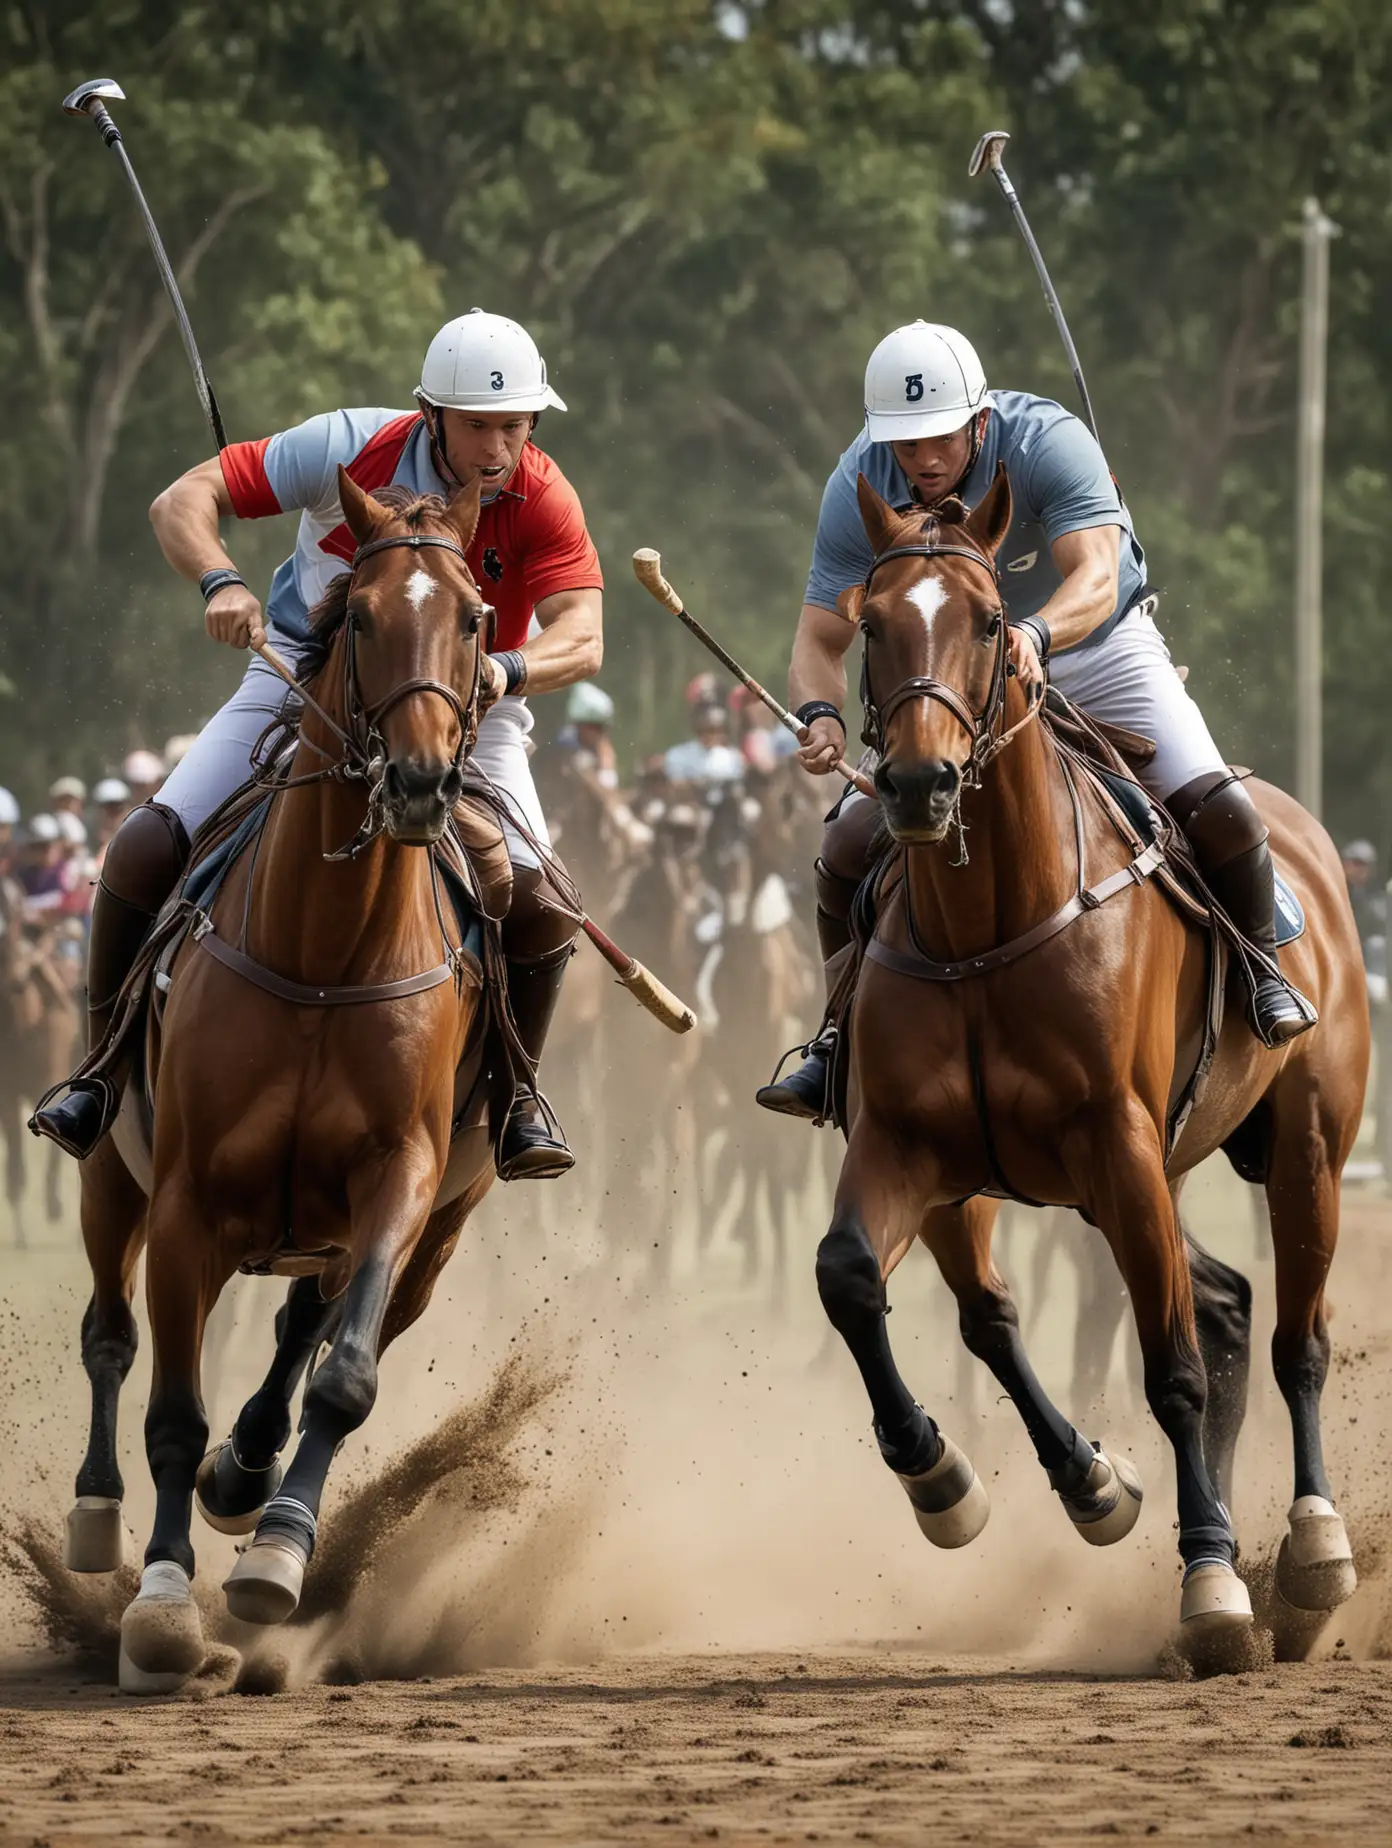 create an image of 2 polo players from the 45 degree perspective, riding alongside each other, one slightly ahead of the other, reaching out for the ball showing intensity on faces and the power of the horses.OM THE SIDEclashing along side of each other going for the ball on their horses showing the intensity on players faces and the power of the horses.